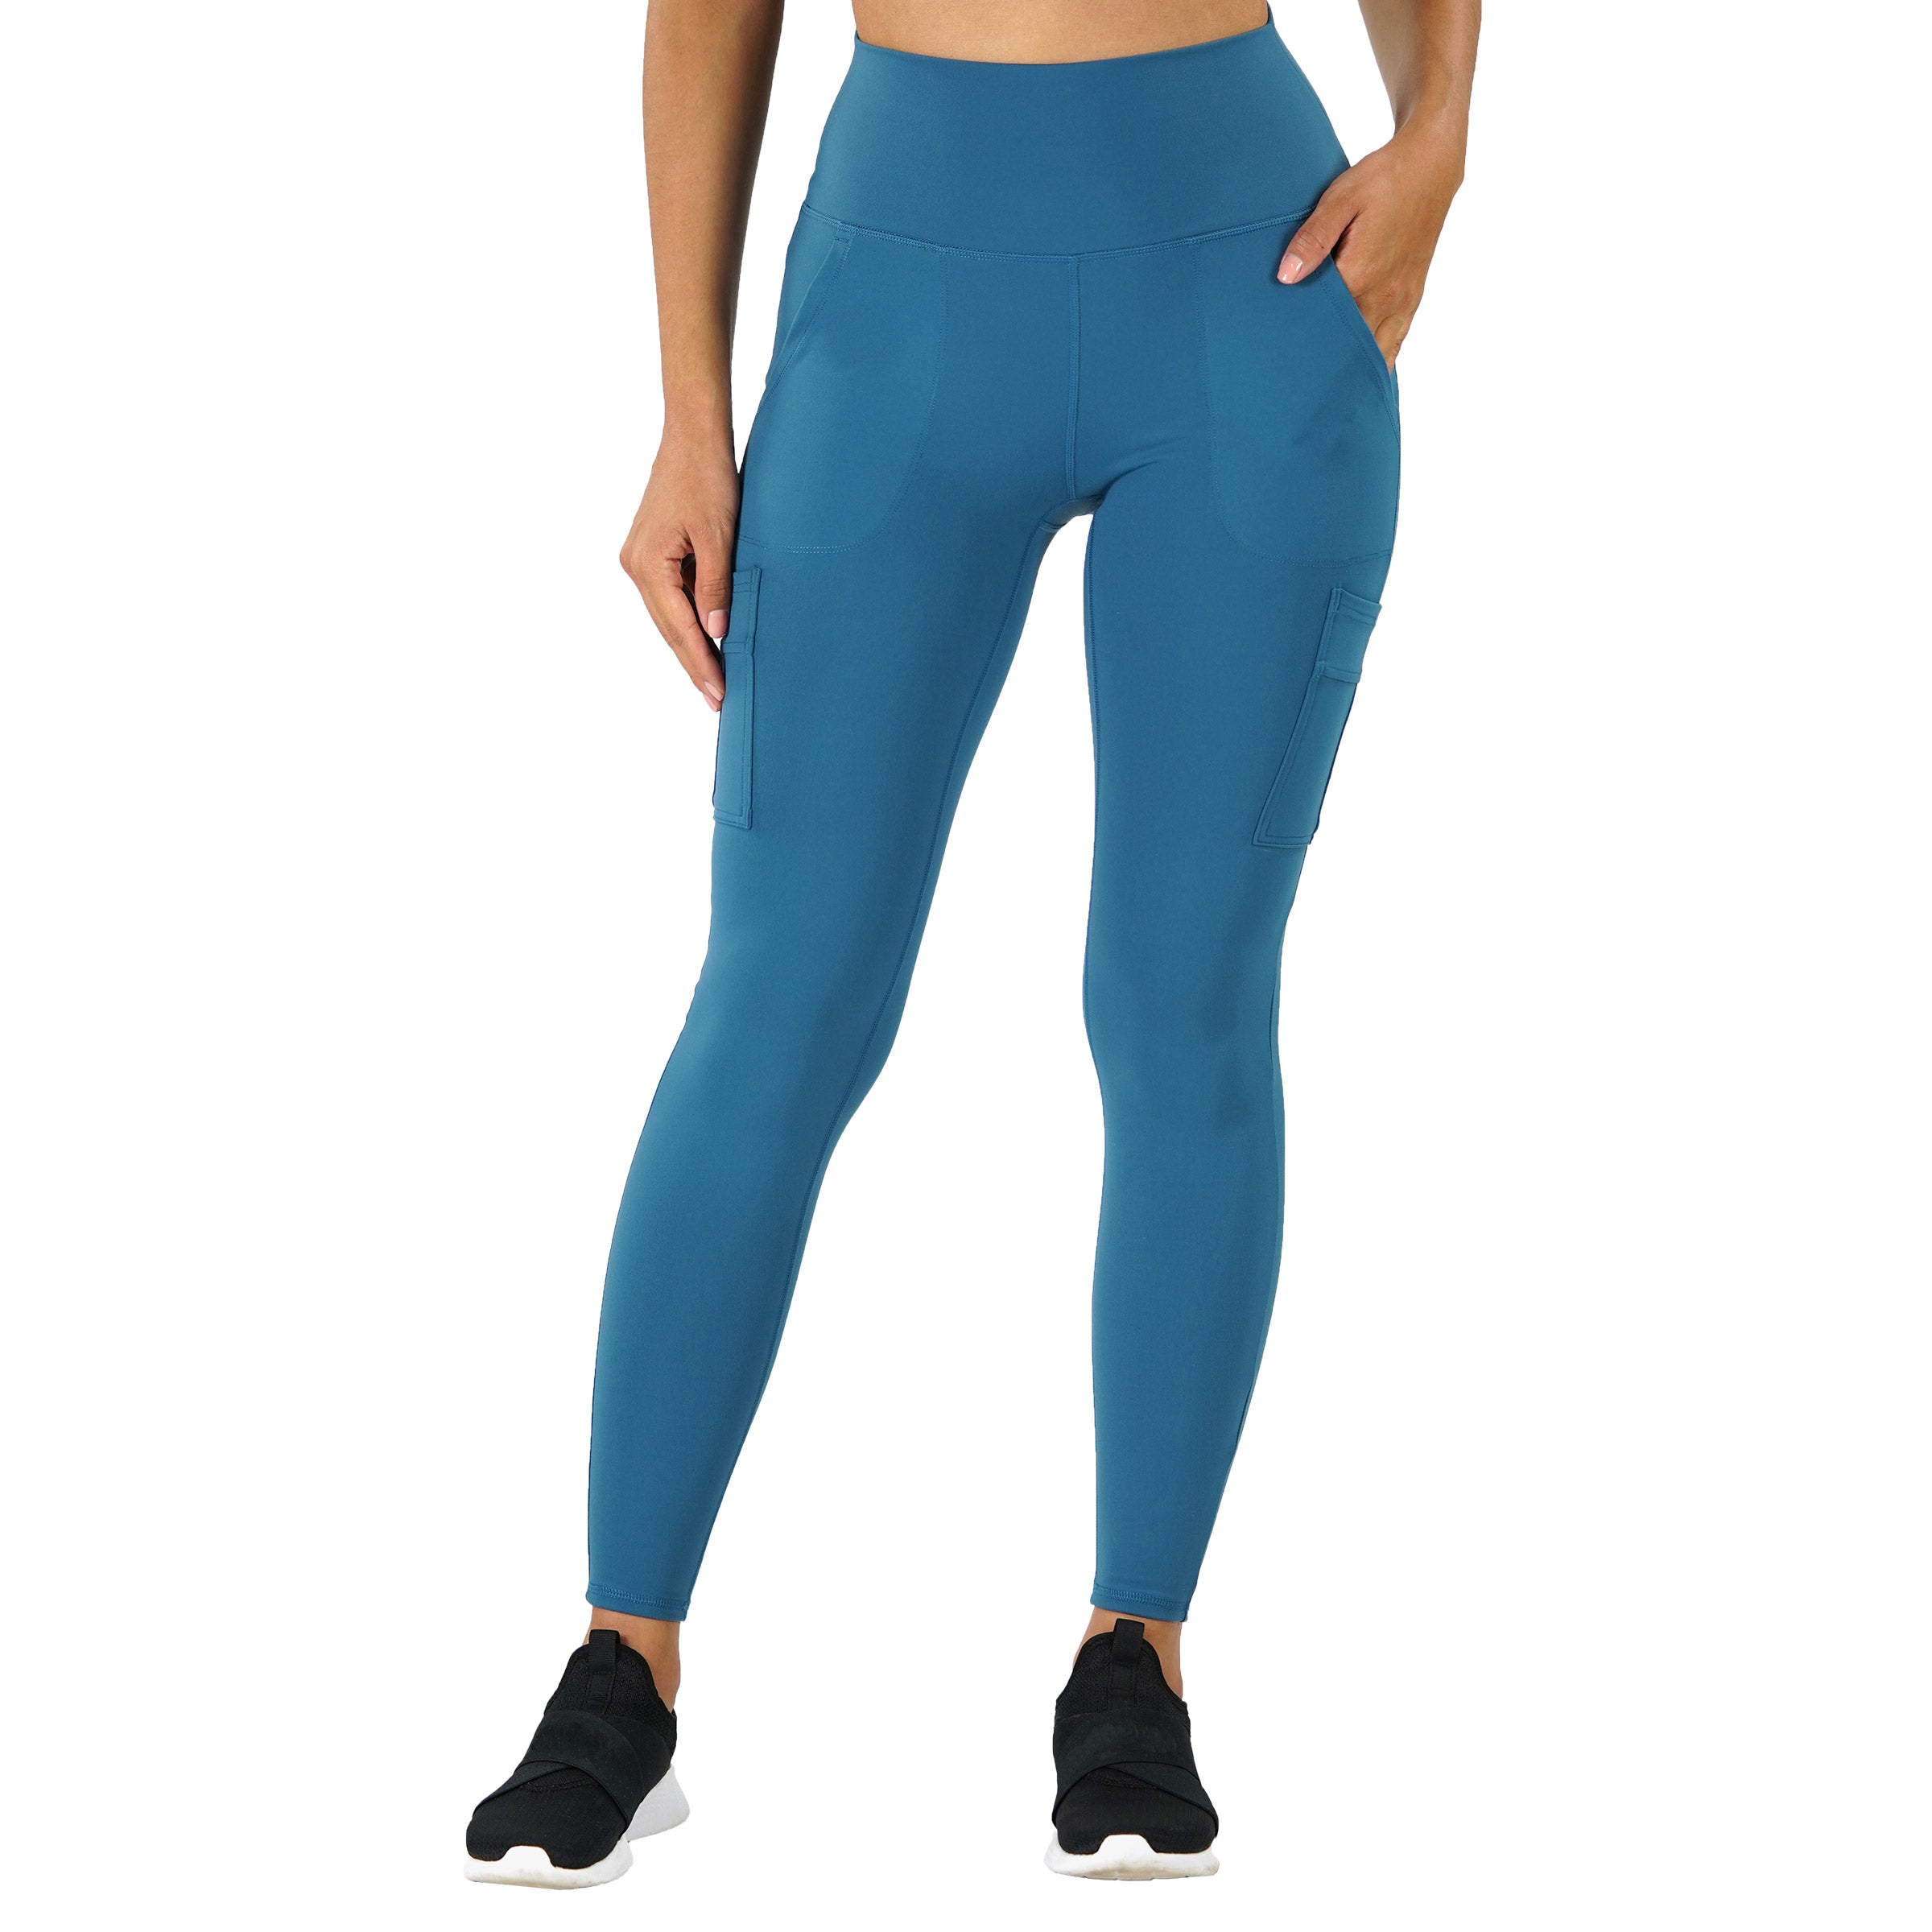 CLEARANCE $14.97 Spyder Women's Drawstring Legging with Pockets :  r/SweetDealsCA